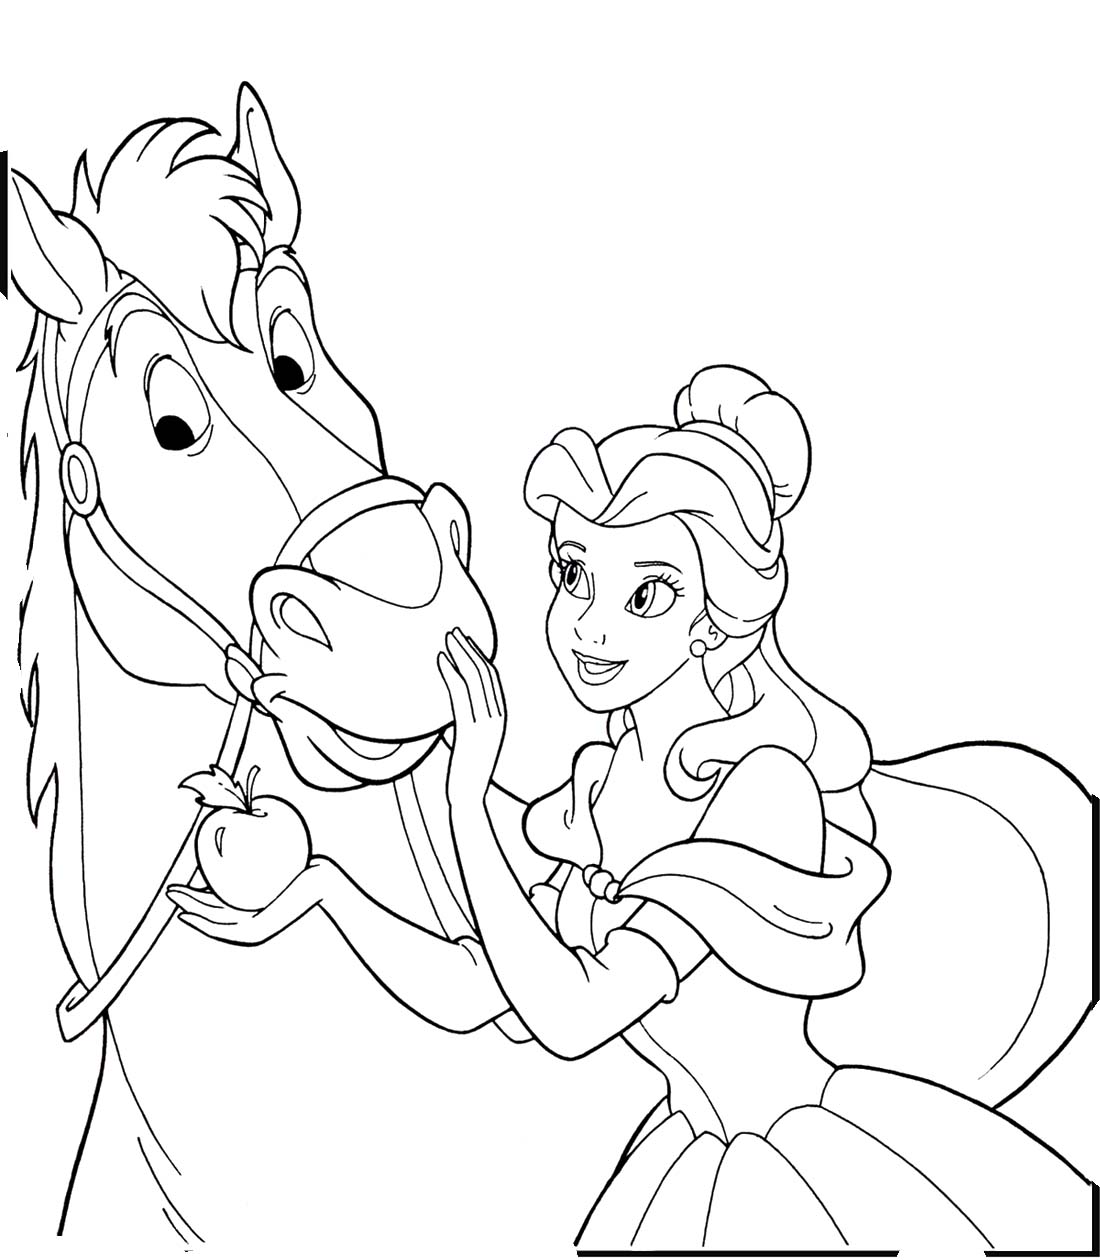 Color Pages Free Download Archives - Page 21 of 49 - Coloring Pages